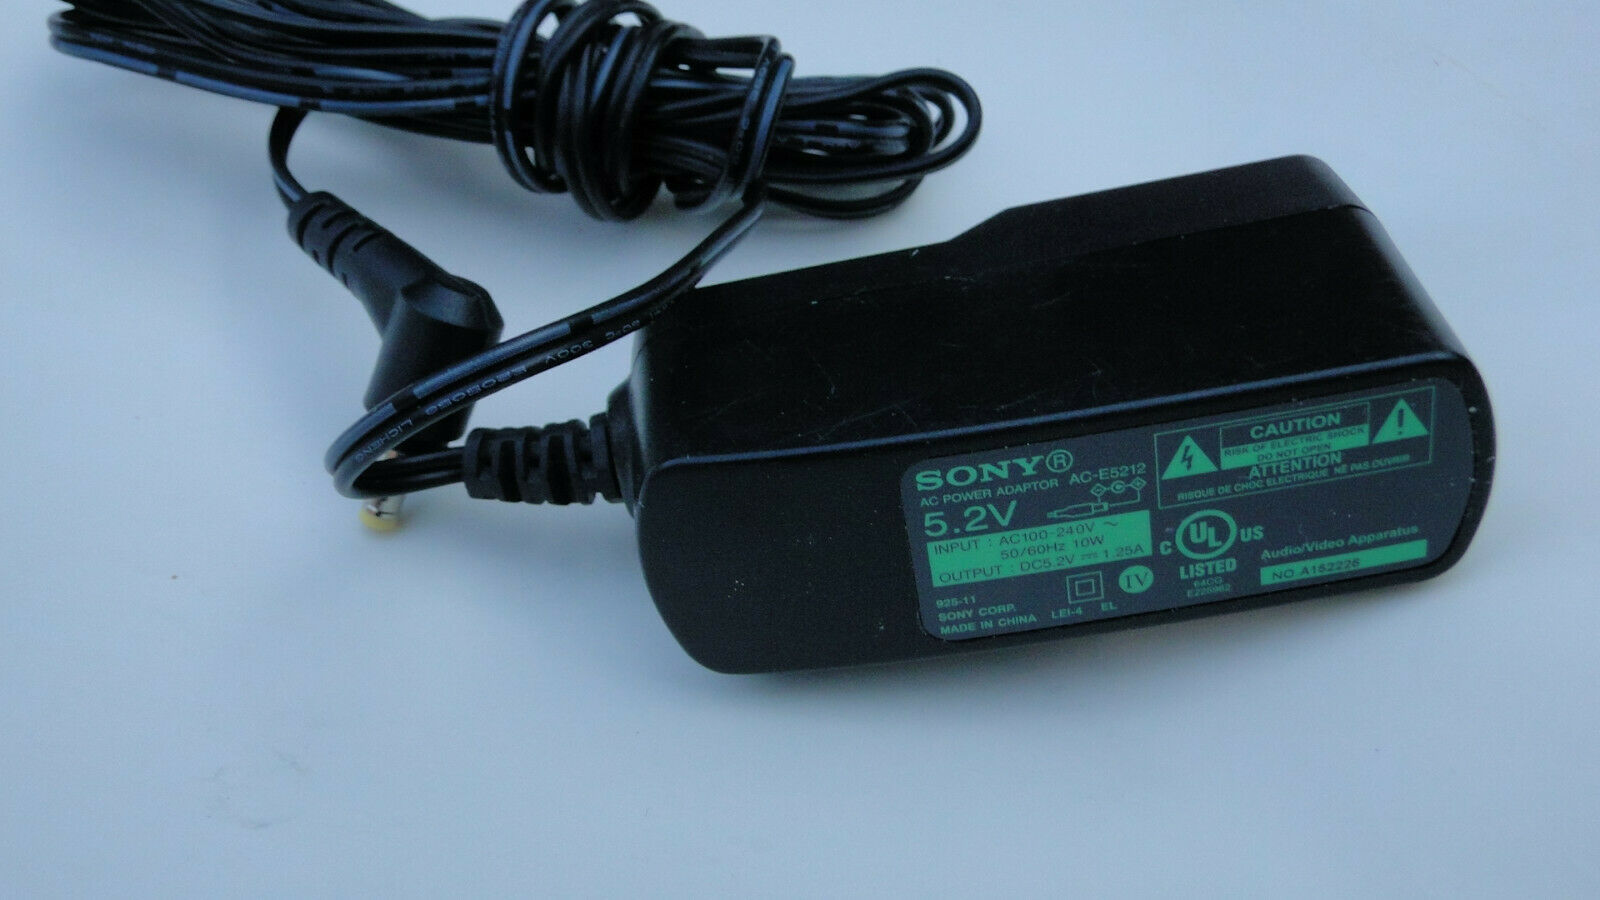 Sony AC-E5212 Adapter charger For SRS-A3 SRS-M50 Bluetooth Speaker 5.2V 1.25A  - $15.53